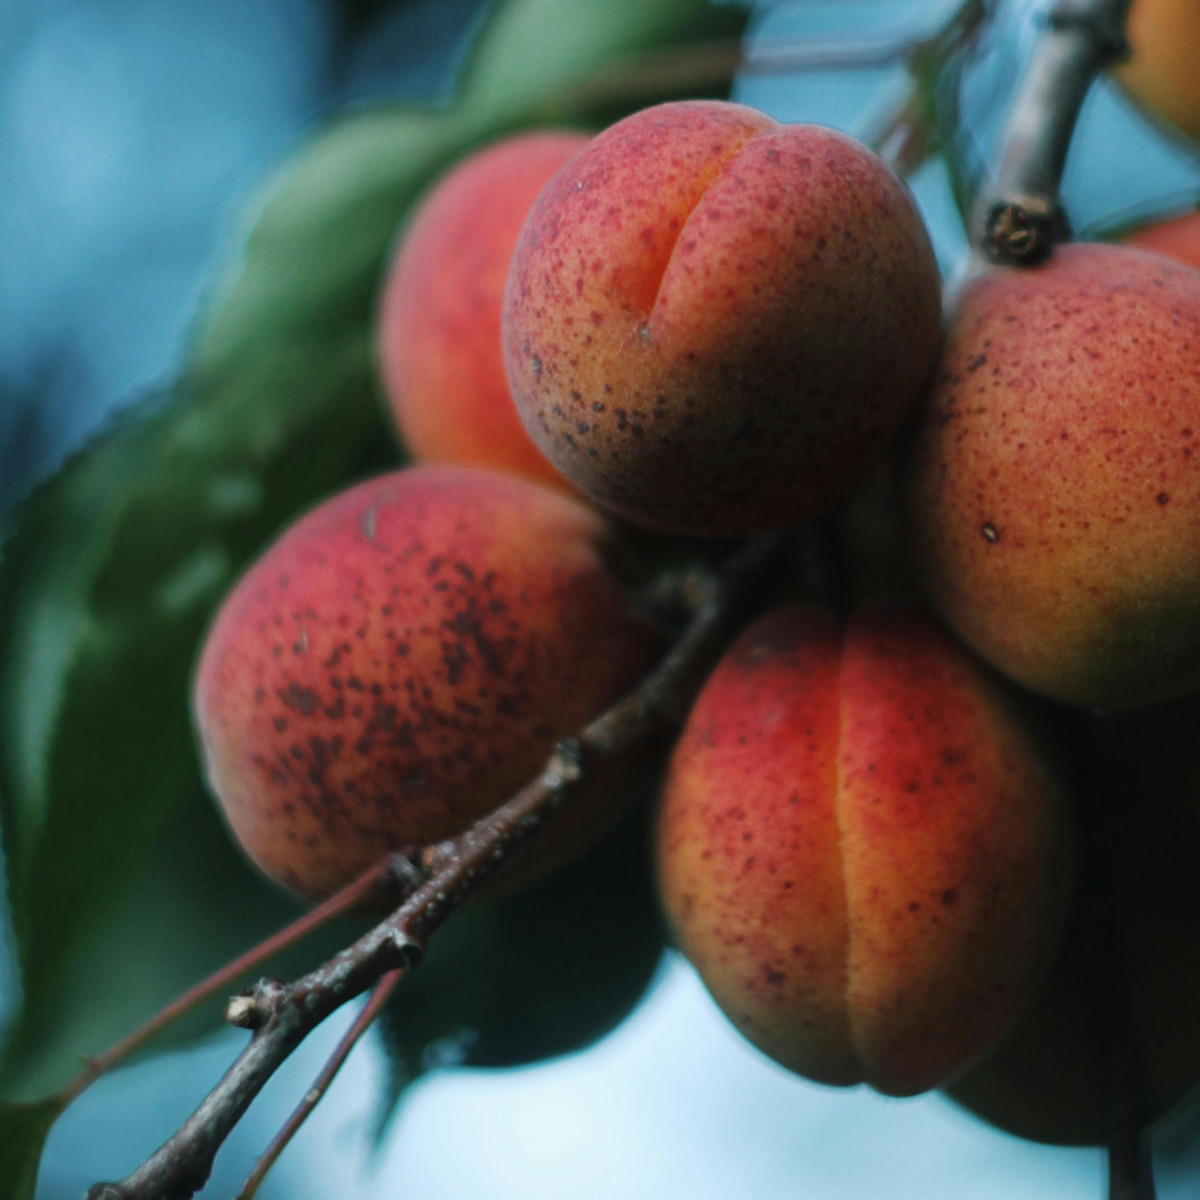 Growing fruit trees is a rewarding way to add to your family's food pantry. Find out more about growing fruit trees.